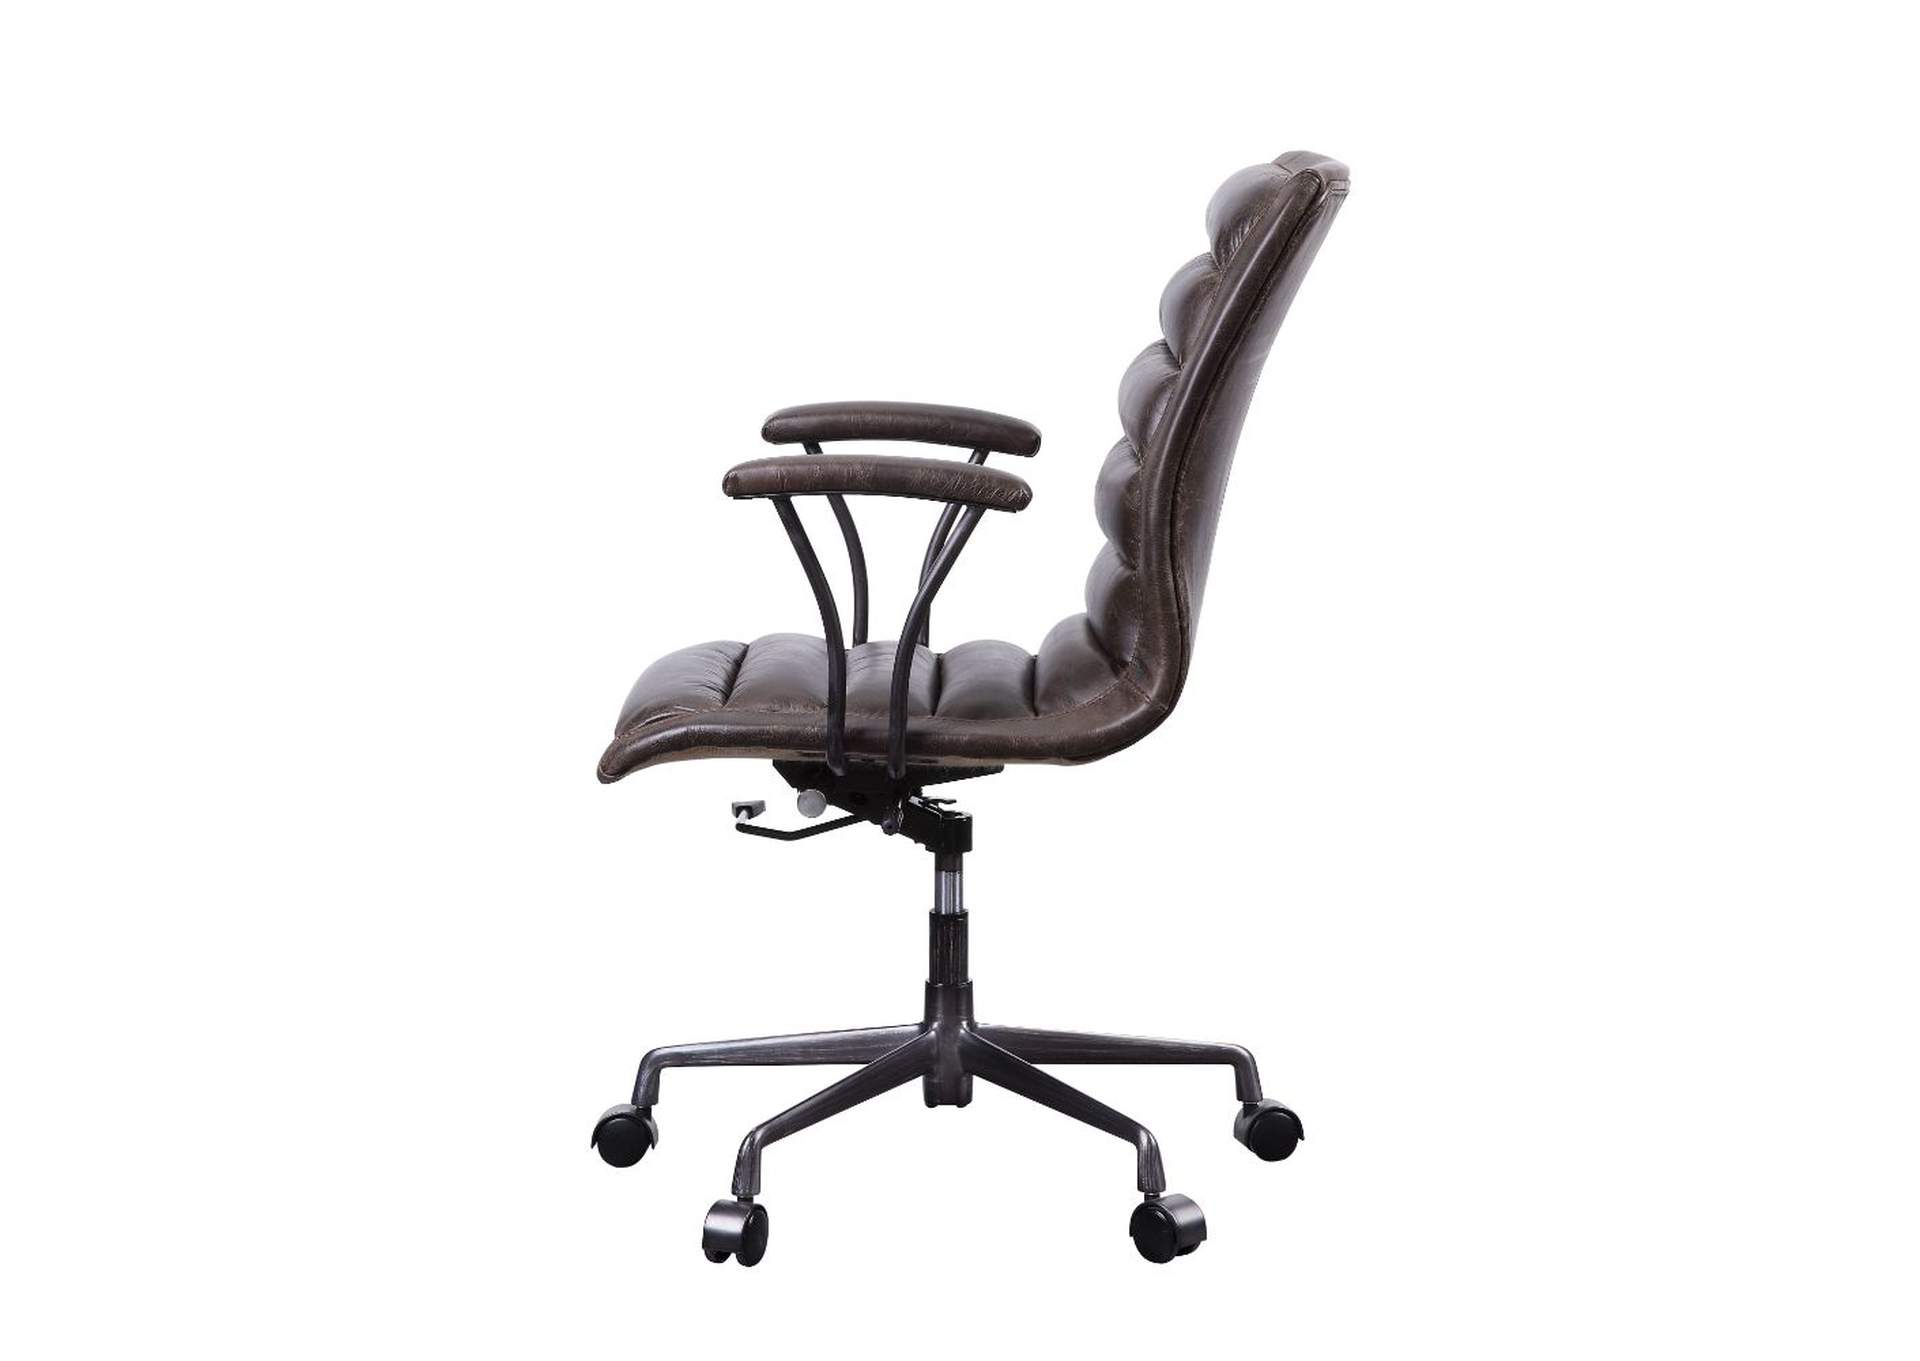 Zooey Executive office chair,Acme